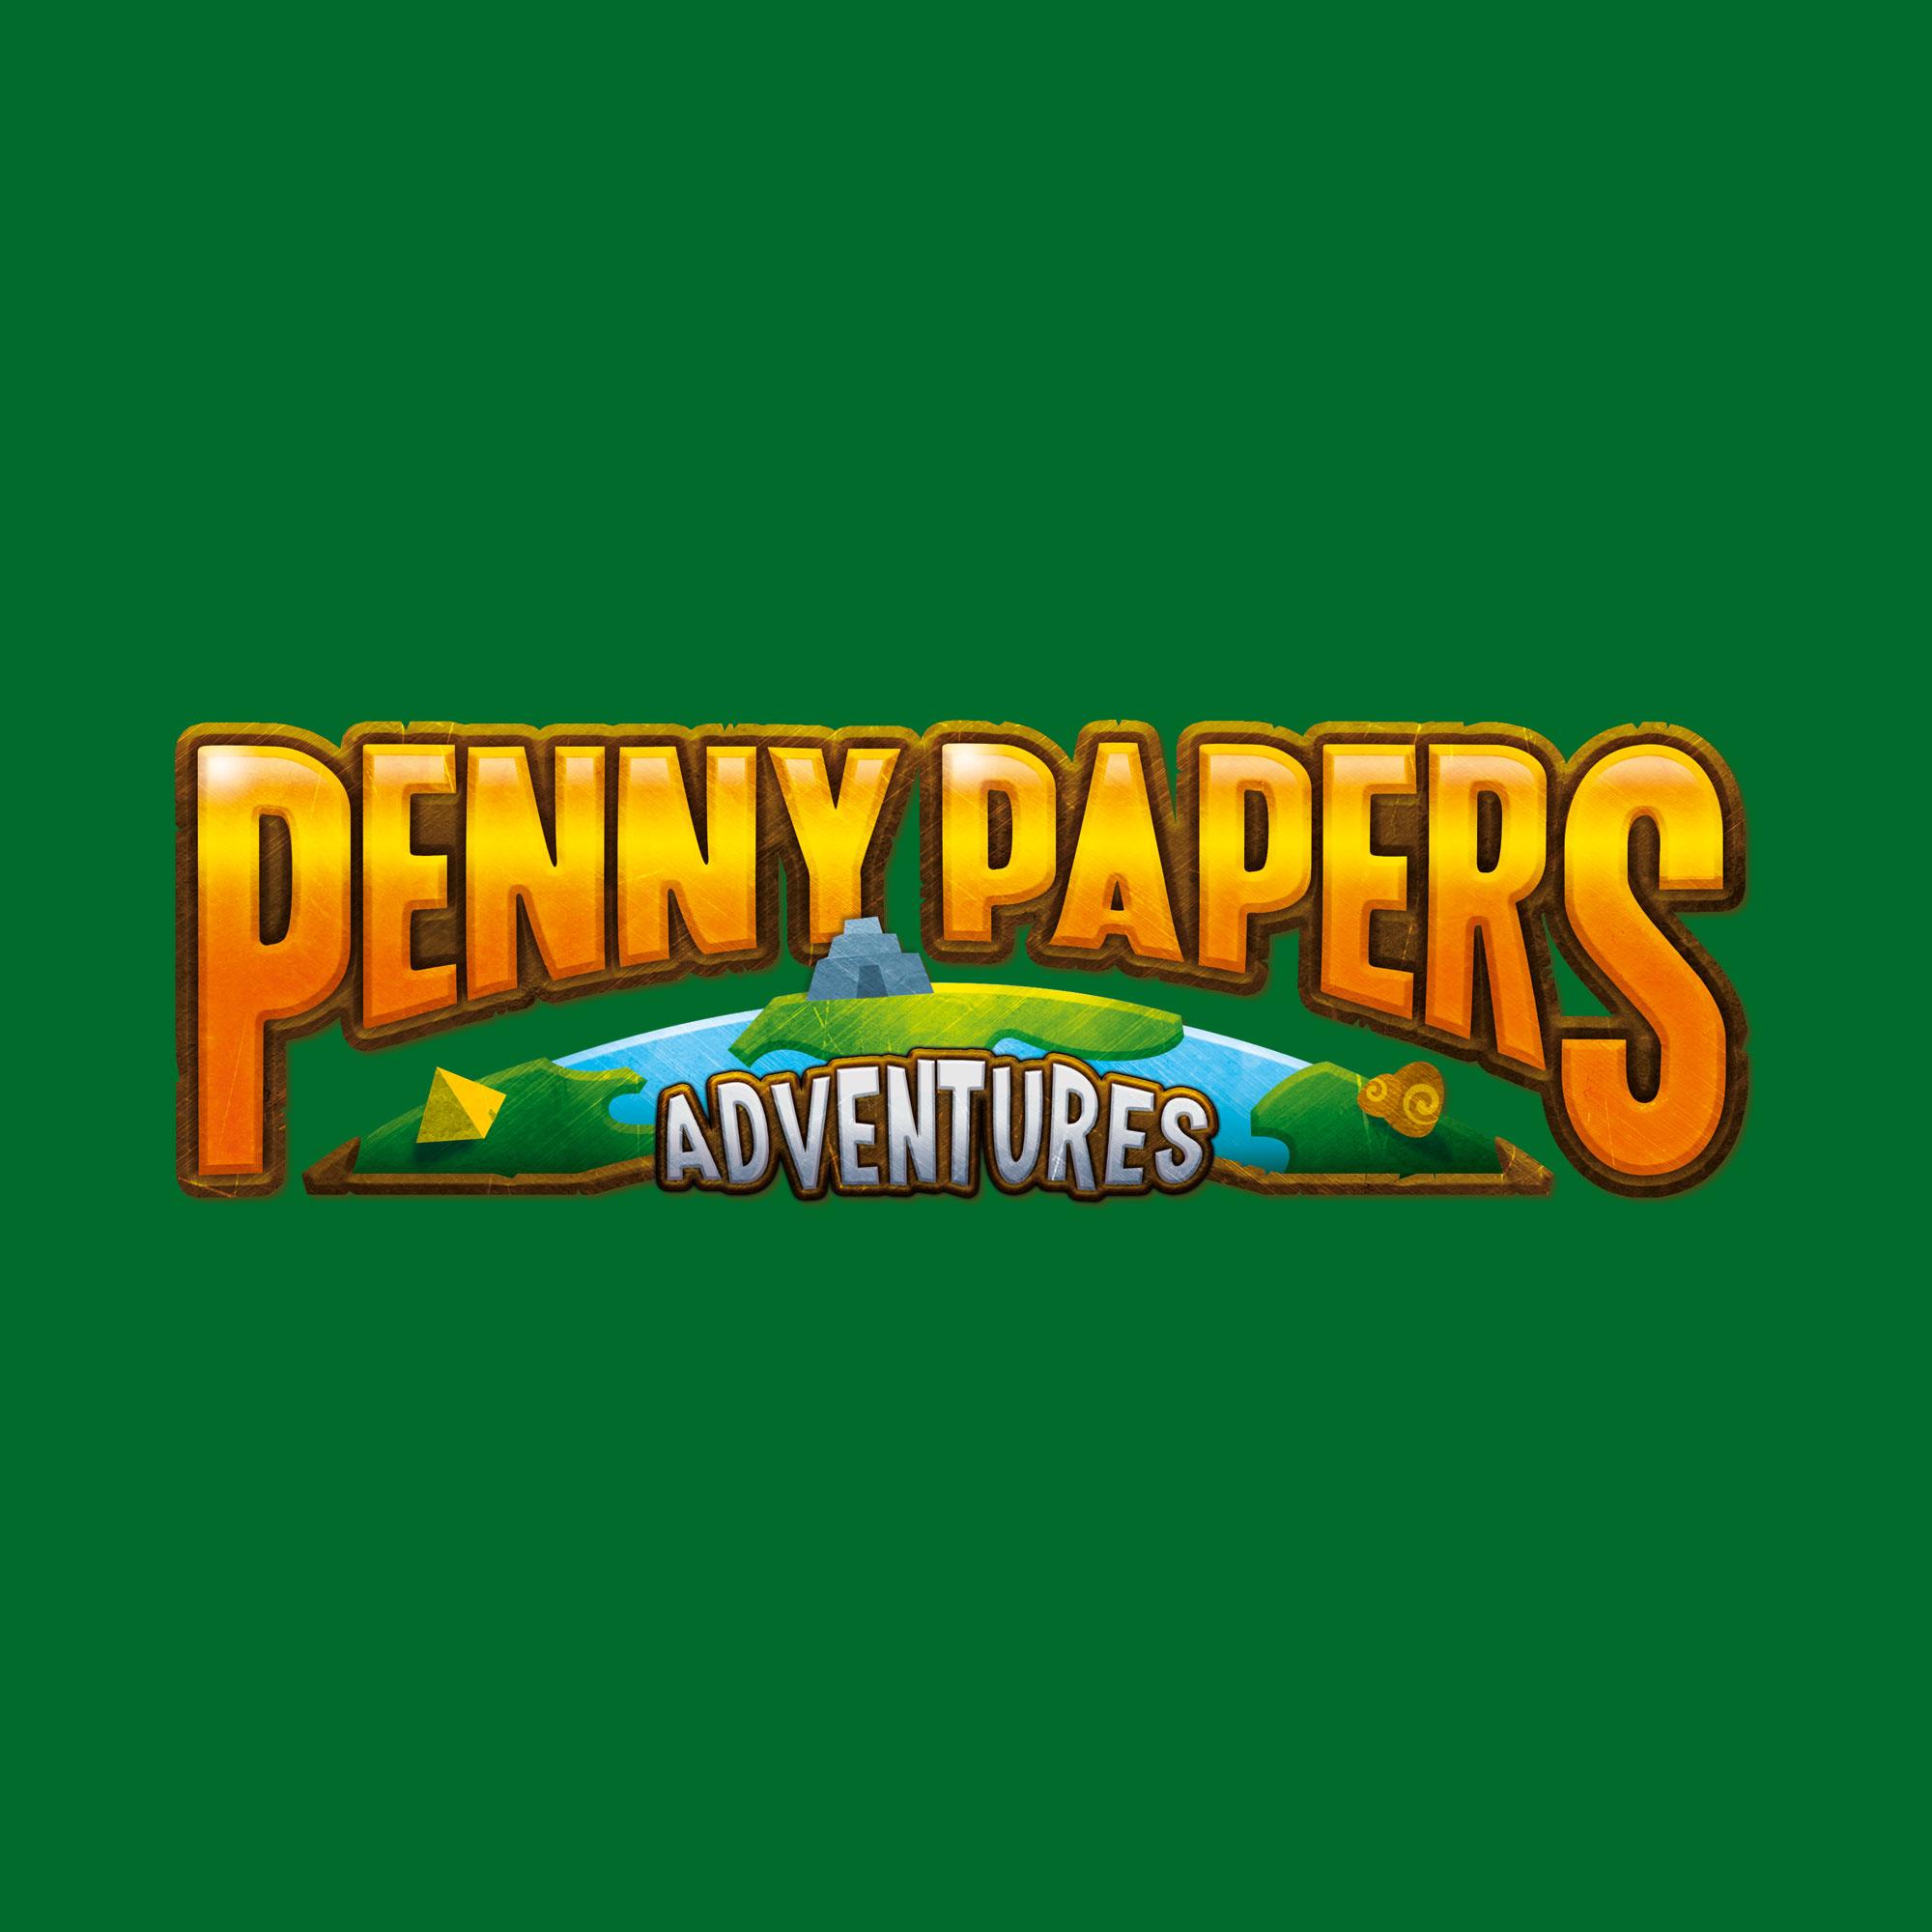 Penny Papers Adventures - Logo